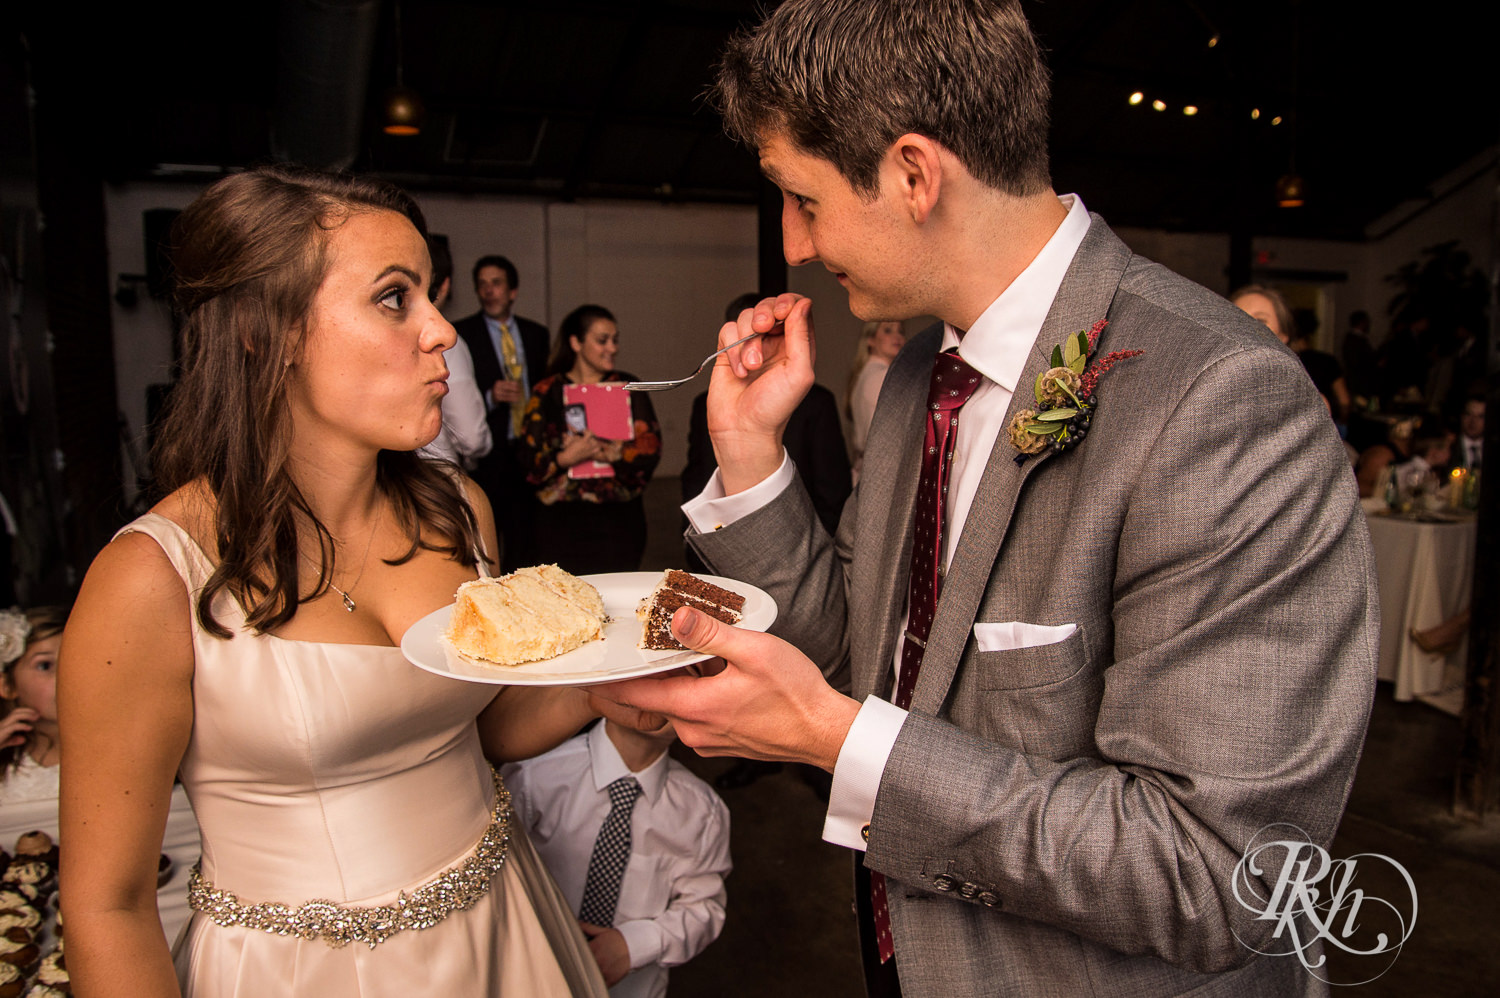 Bride and groom feed each other cake during wedding reception speeches at Paikka in Saint Paul, Minnesota.